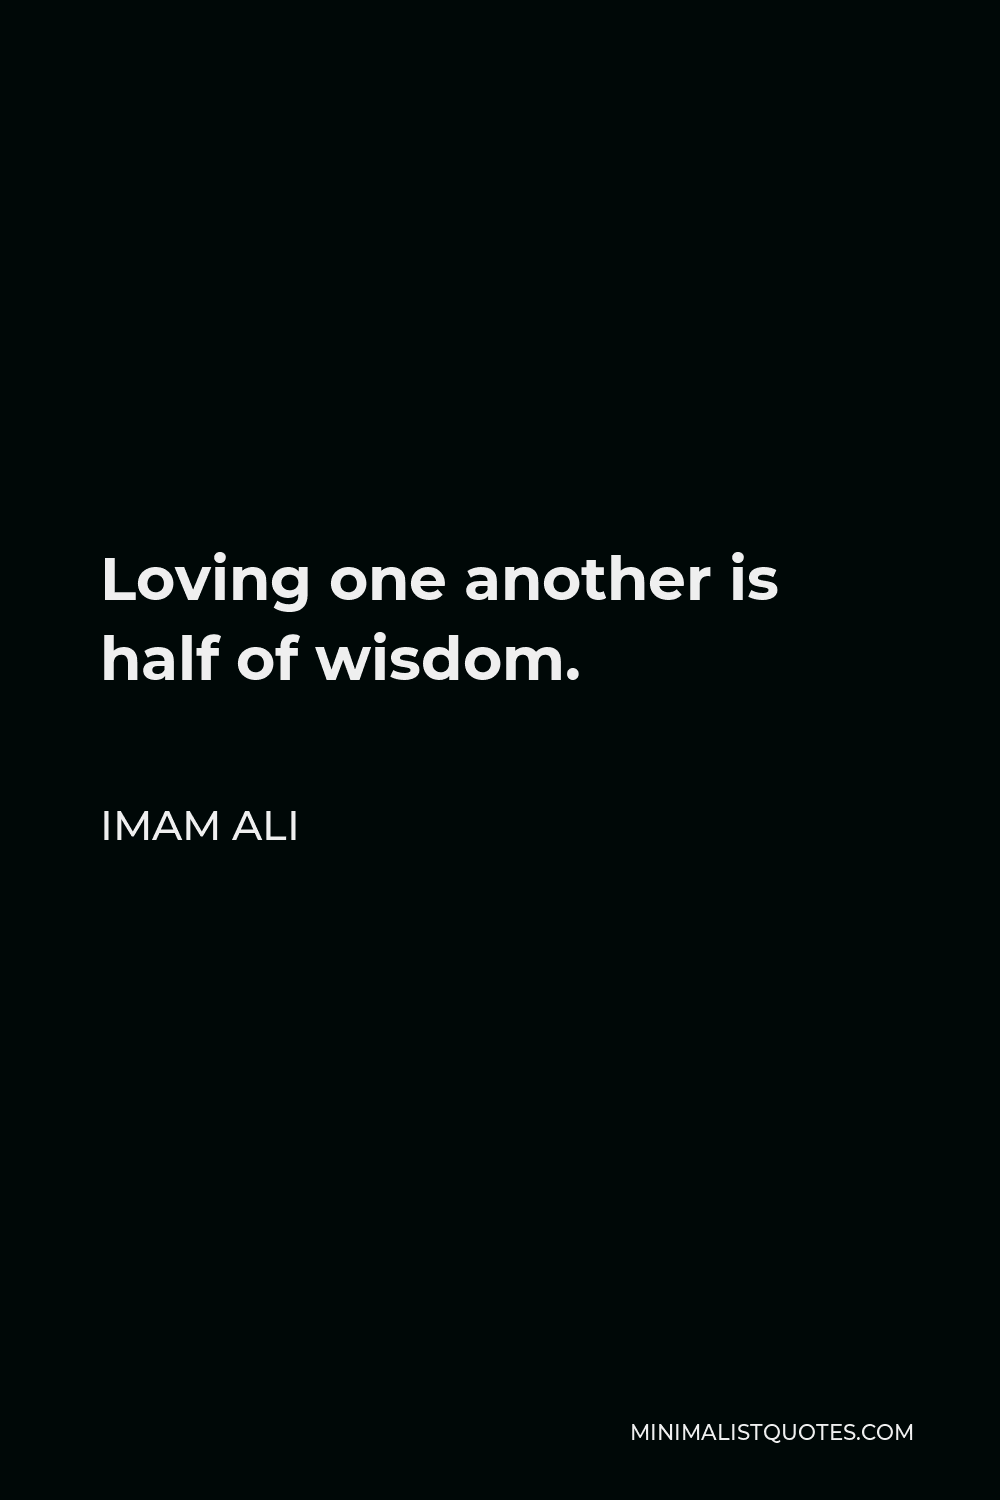 Imam Ali Quote: Loving One Another Is Half Of Wisdom.